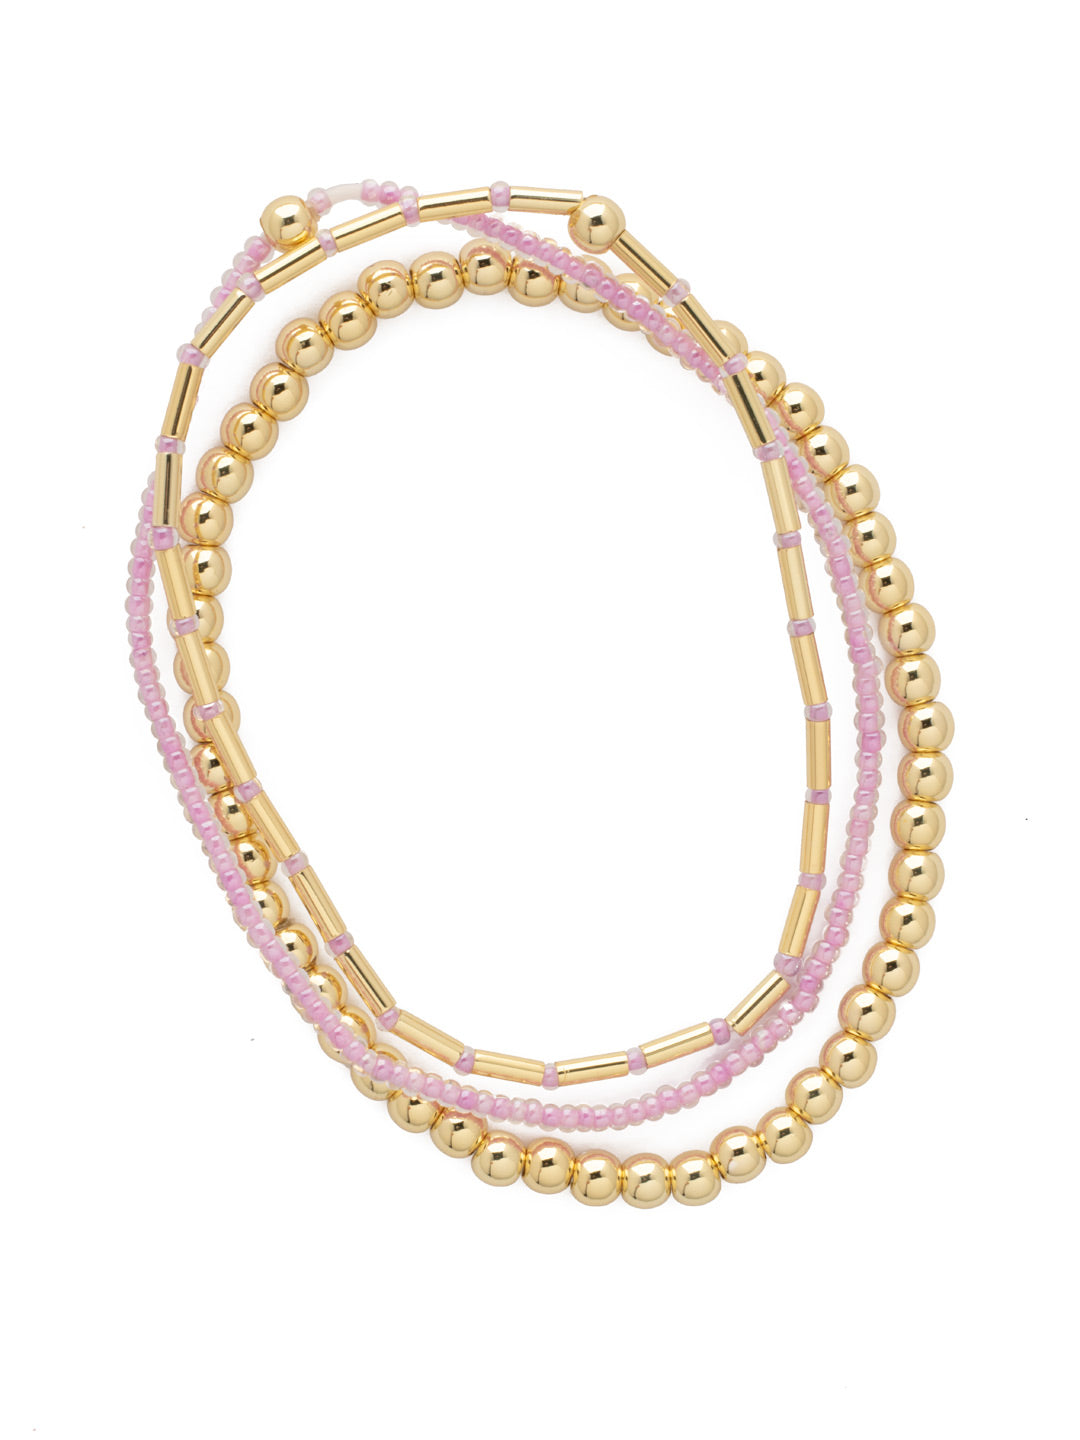 Trina Stretch Bracelet - BFM5BGVI - <p>The Trina Stretch Bracelets features 3 assorted stretch bracelets; perfect to mix, match, and stack with your favorite bracelets! From Sorrelli's Violet collection in our Bright Gold-tone finish.</p>